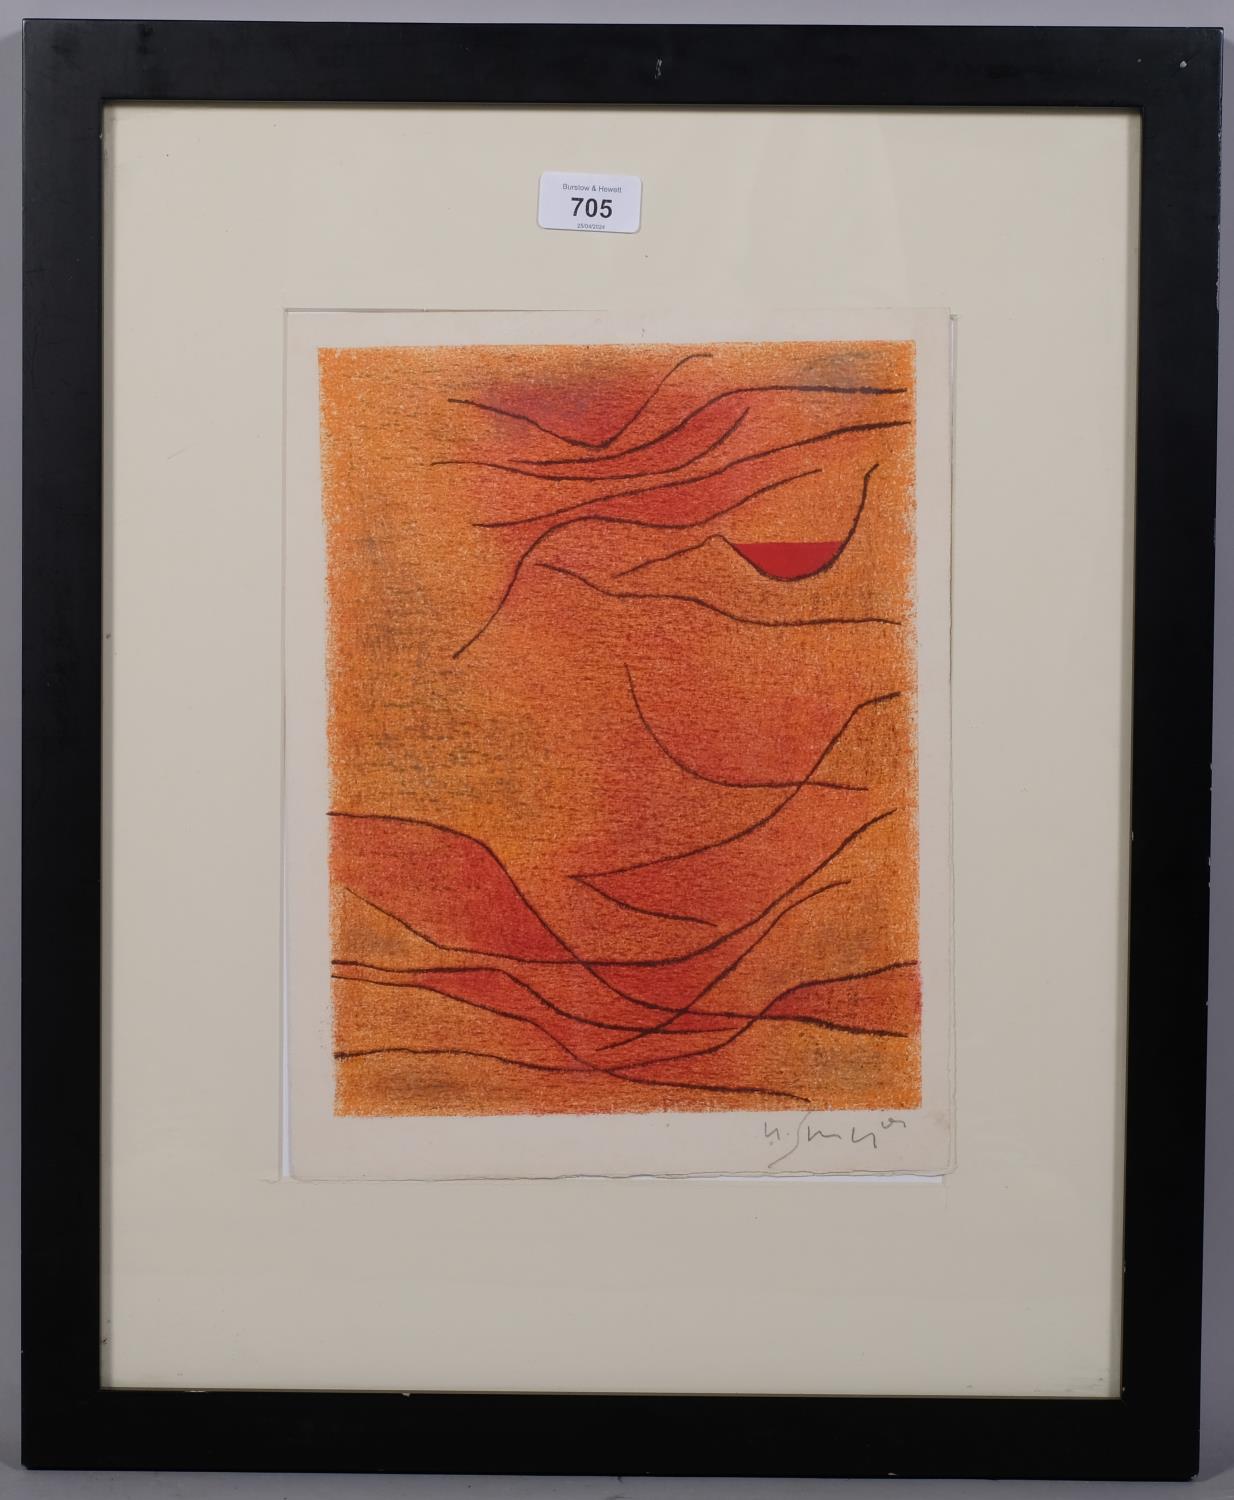 Gustave Singier, abstract orange and red, original lithograph, issued 1959, Galerie France, signed - Image 2 of 4